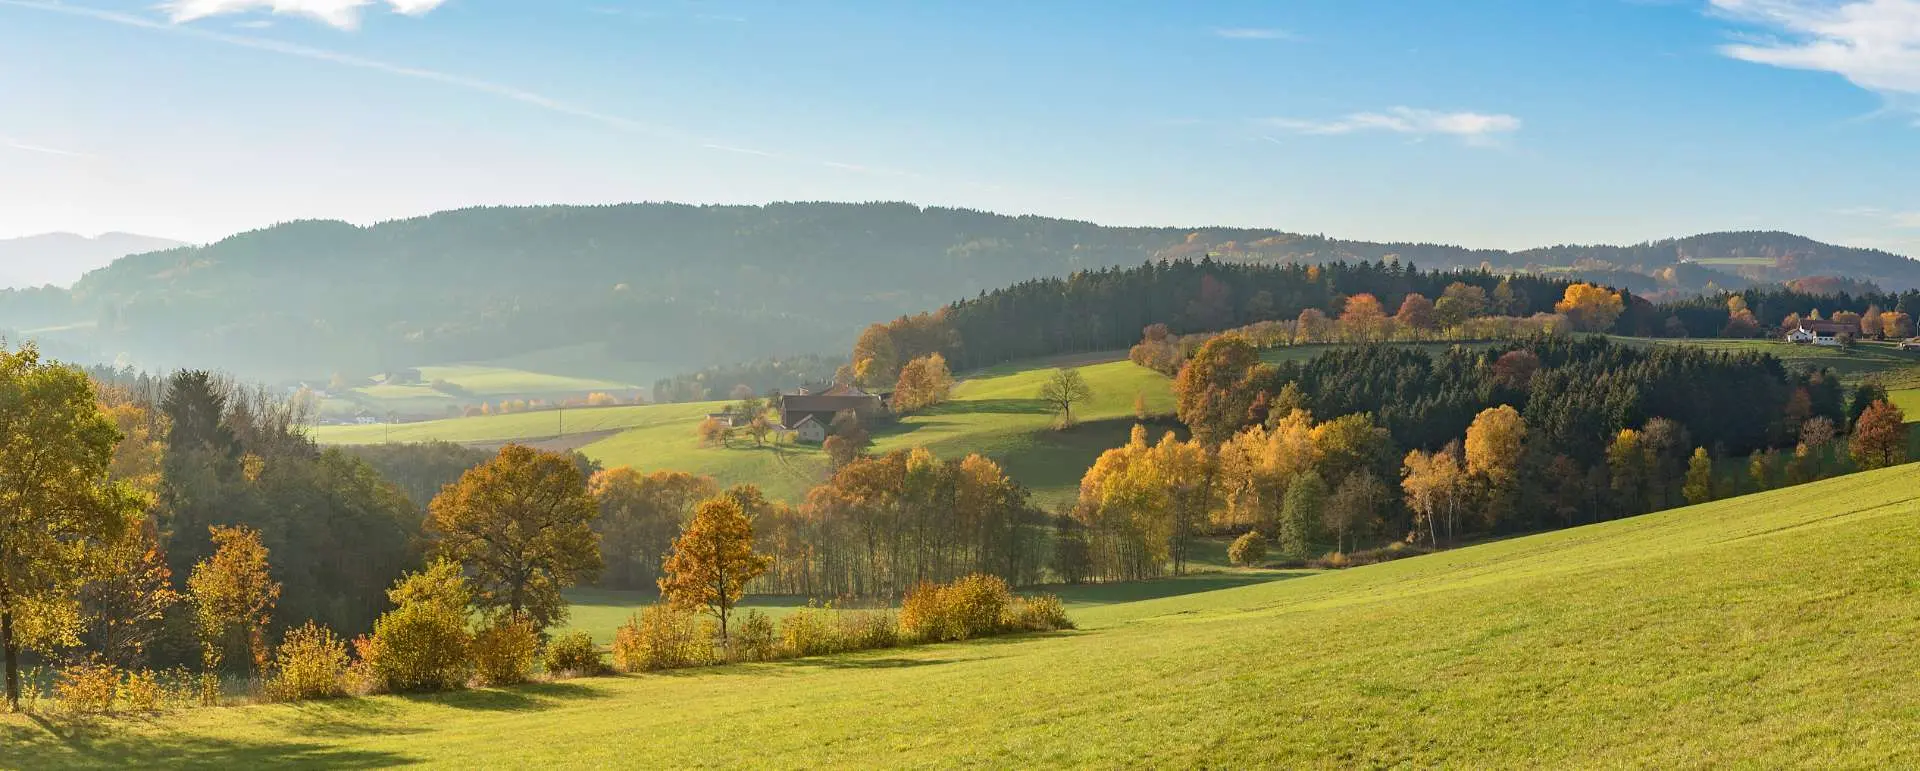 Lower Bavaria - the destination for groups